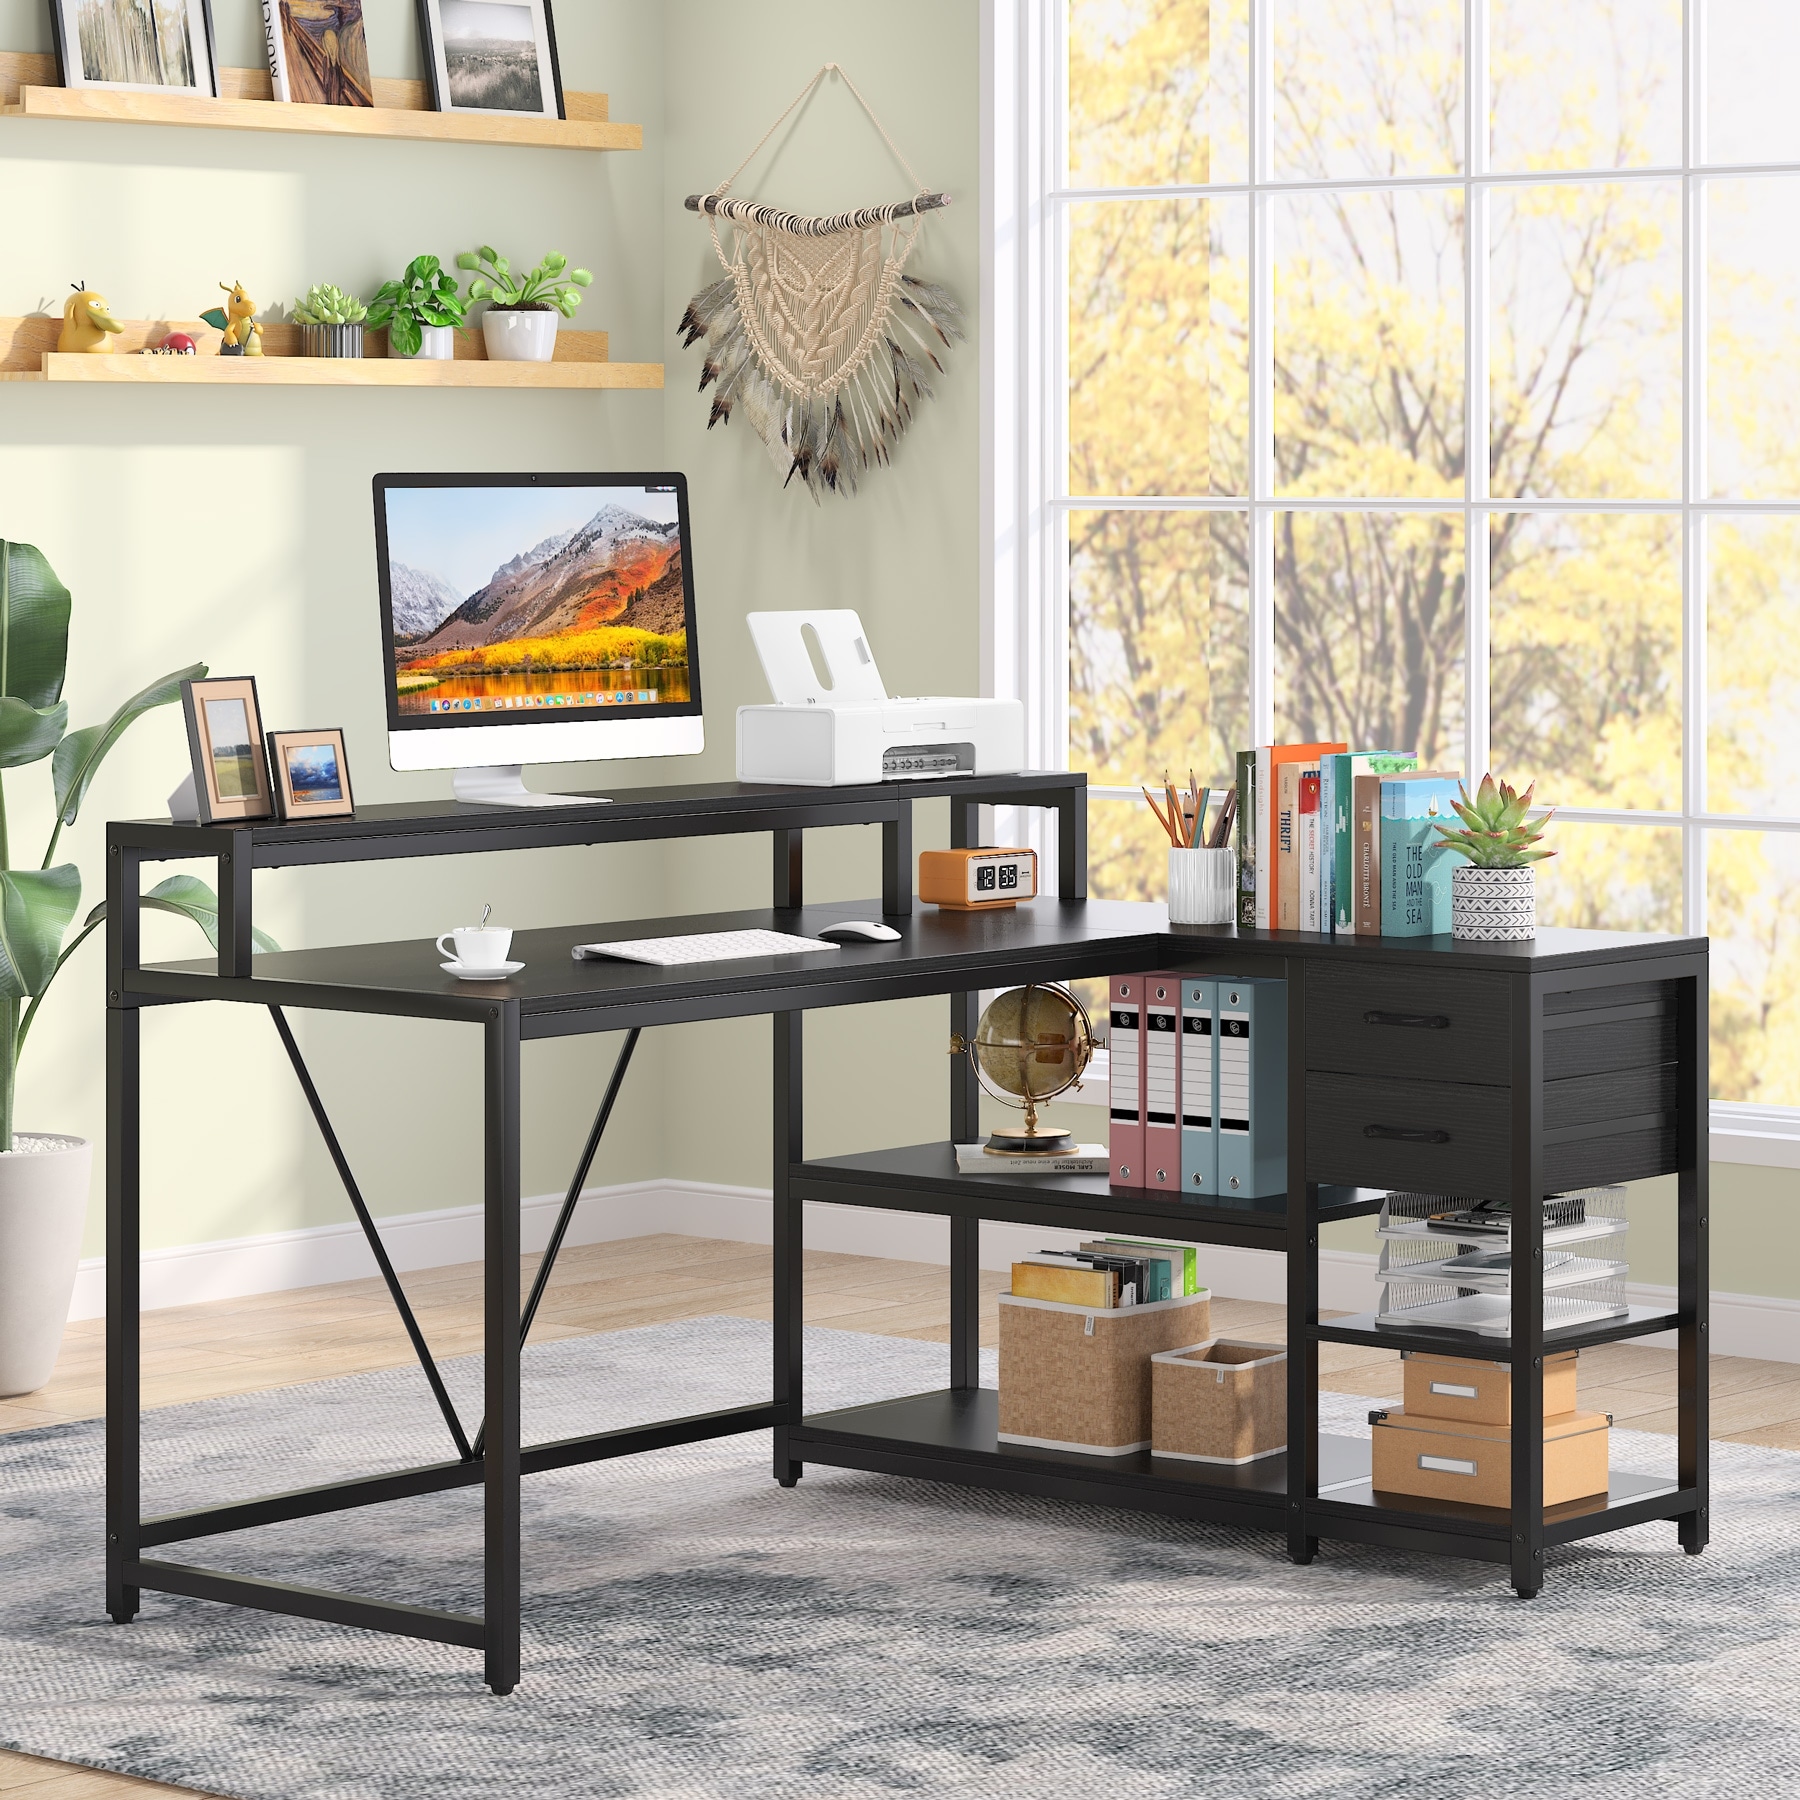 https://ak1.ostkcdn.com/images/products/is/images/direct/c3fac1b48b690ddb23a4126cfdedd142ffa0ffd9/L-Shaped-Desk-with-Drawer%2C-Home-Office-Corner-Desk-with-Storage-Shelves-and-Monitor-Stand%2C-Rustic-PC-Desk-for-Small-Space.jpg